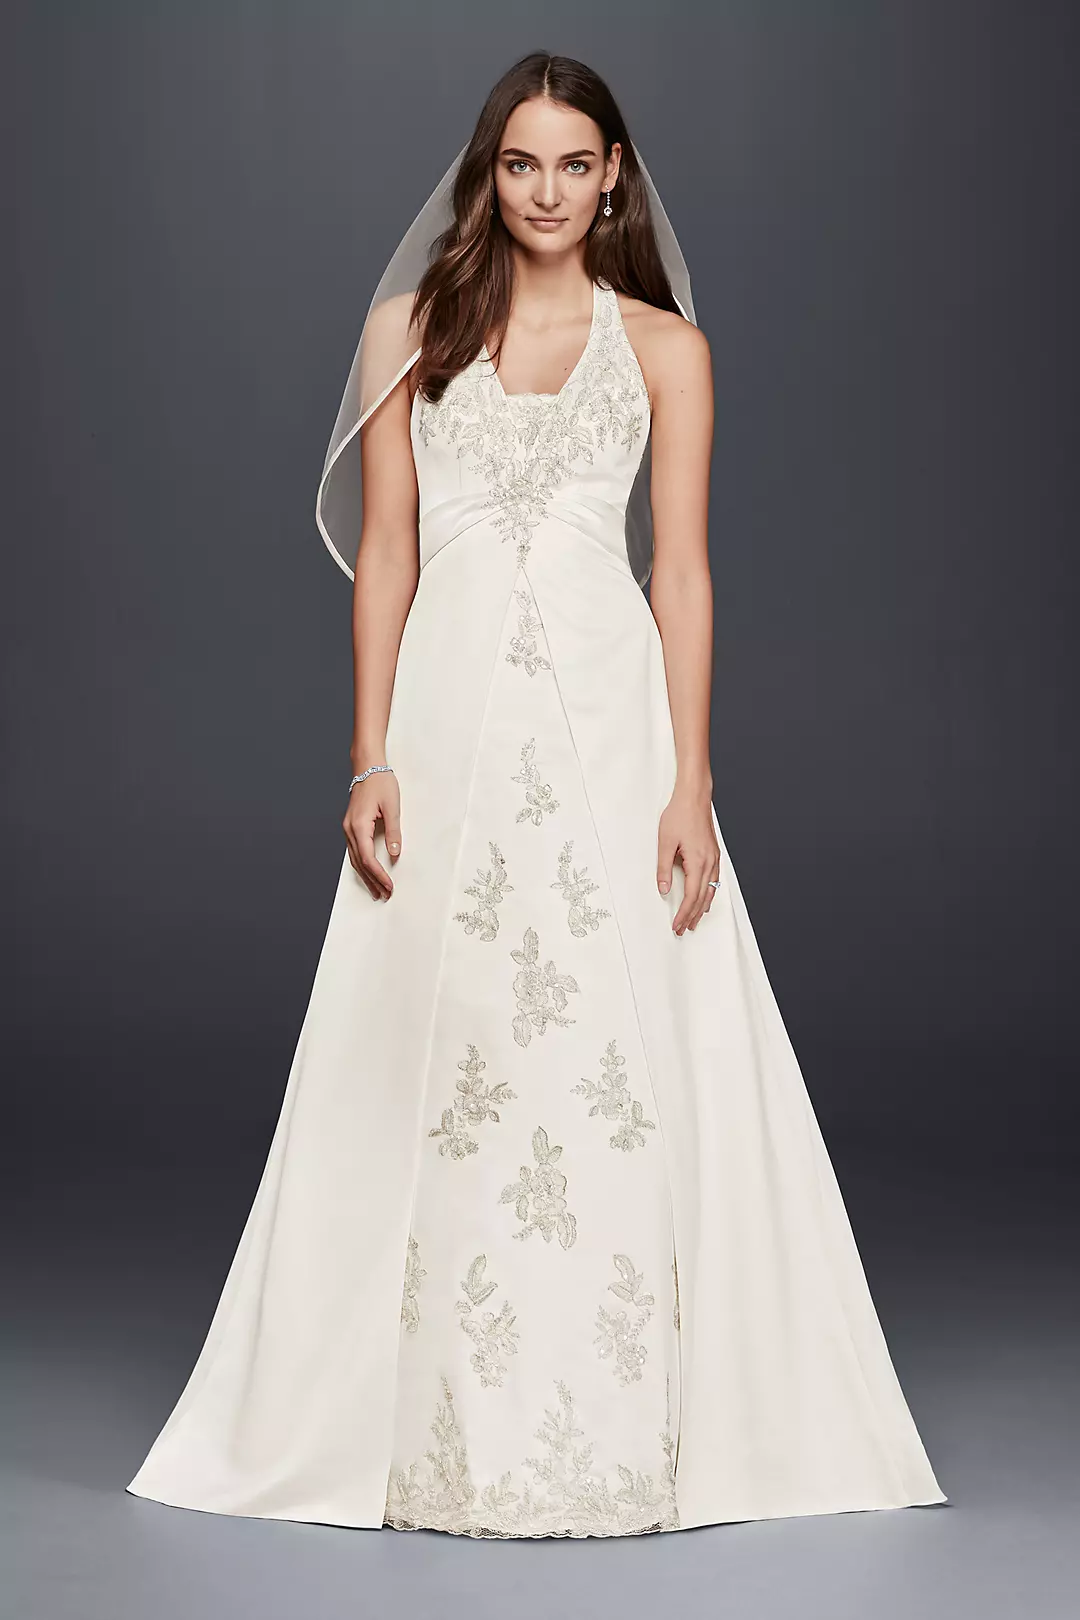 Halter A-Line Wedding Dress with Lace Appliques Image